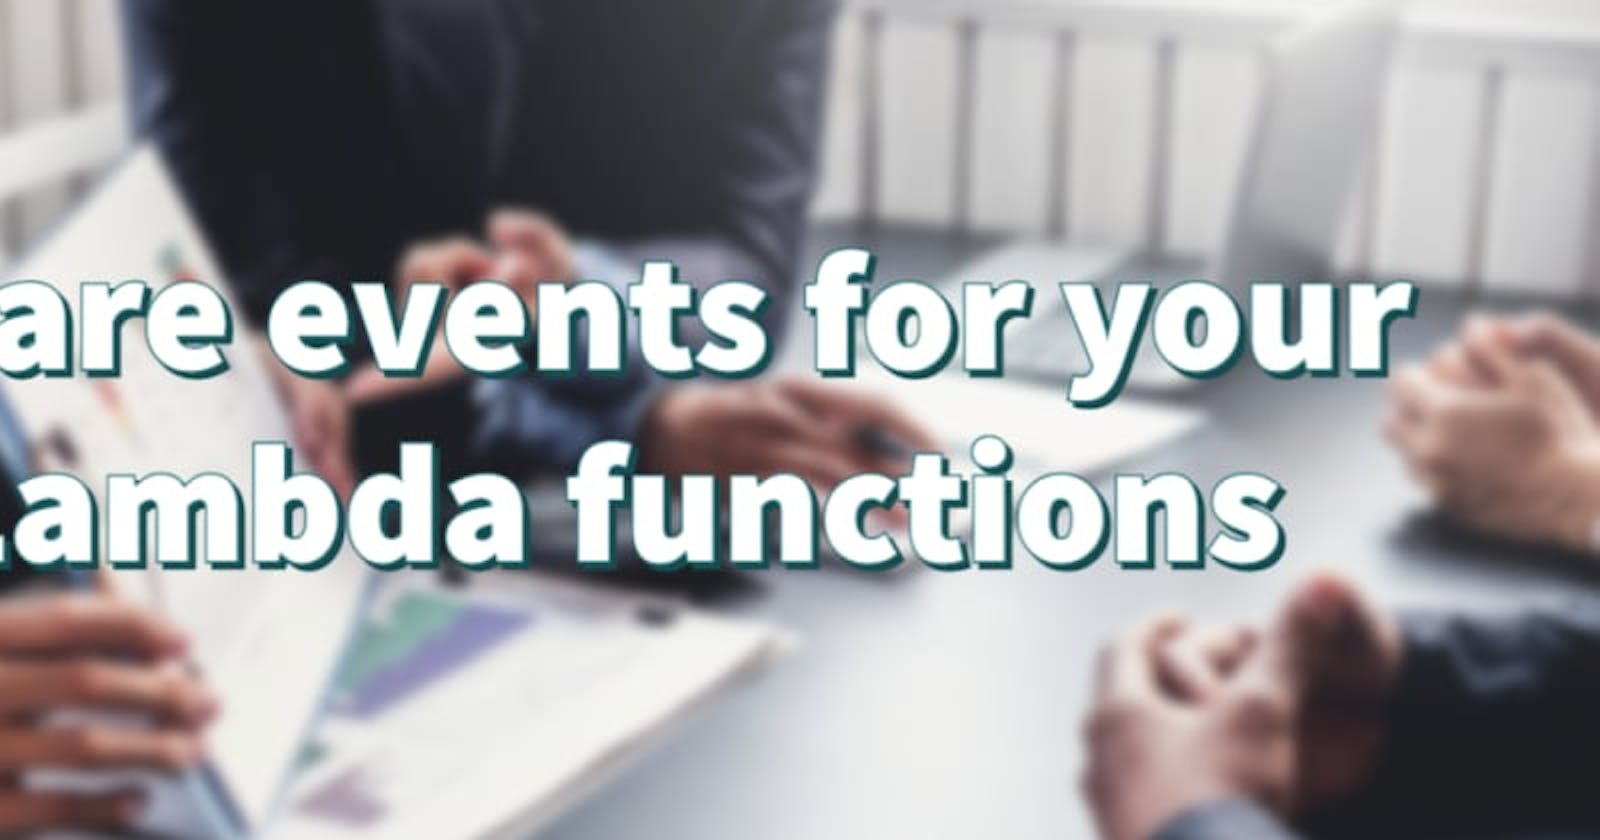 Share events for your Lambda functions